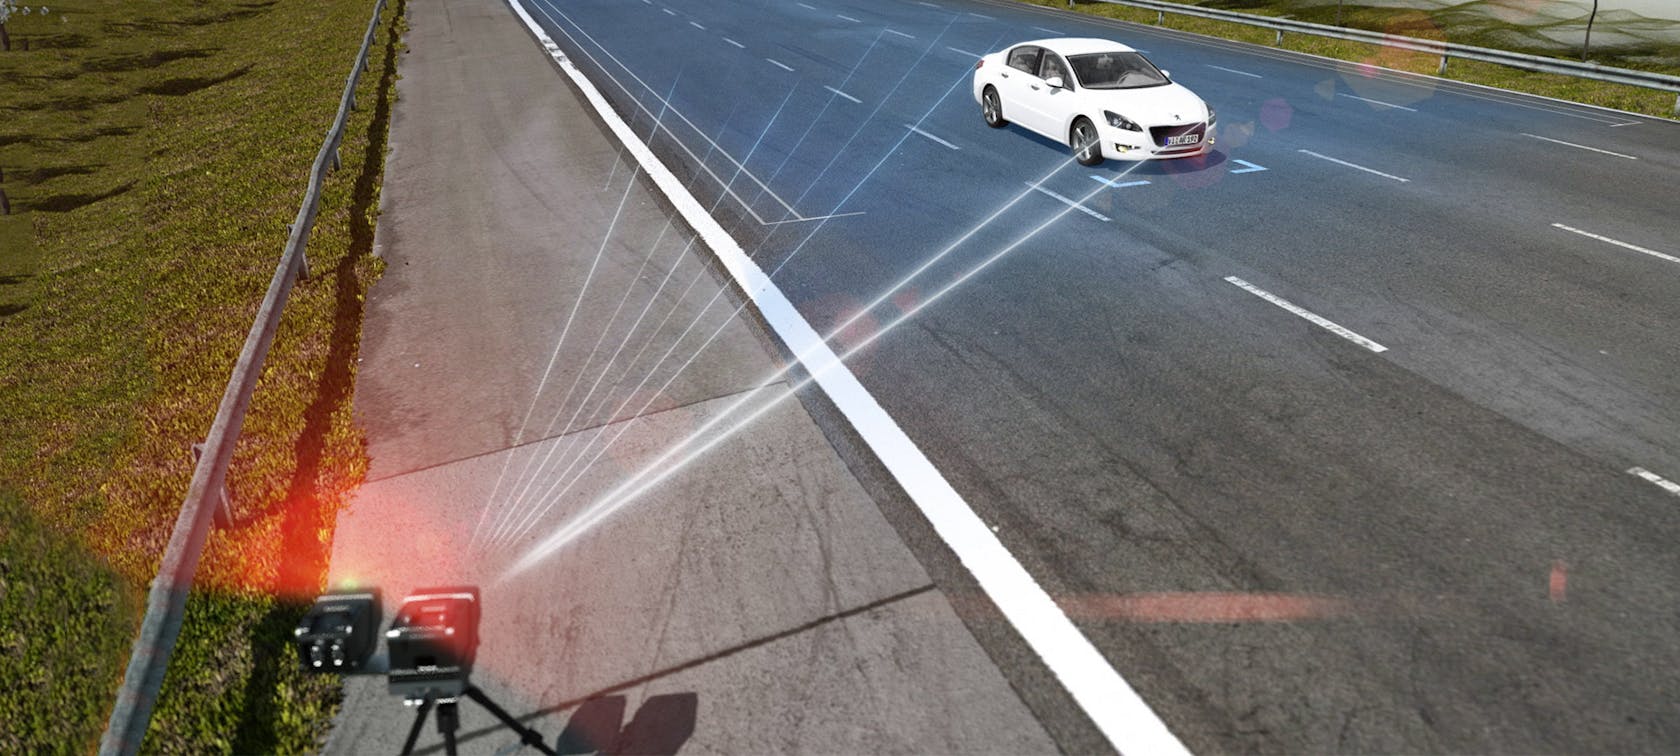 Precise speed enforcement with LIDAR measuring technology								